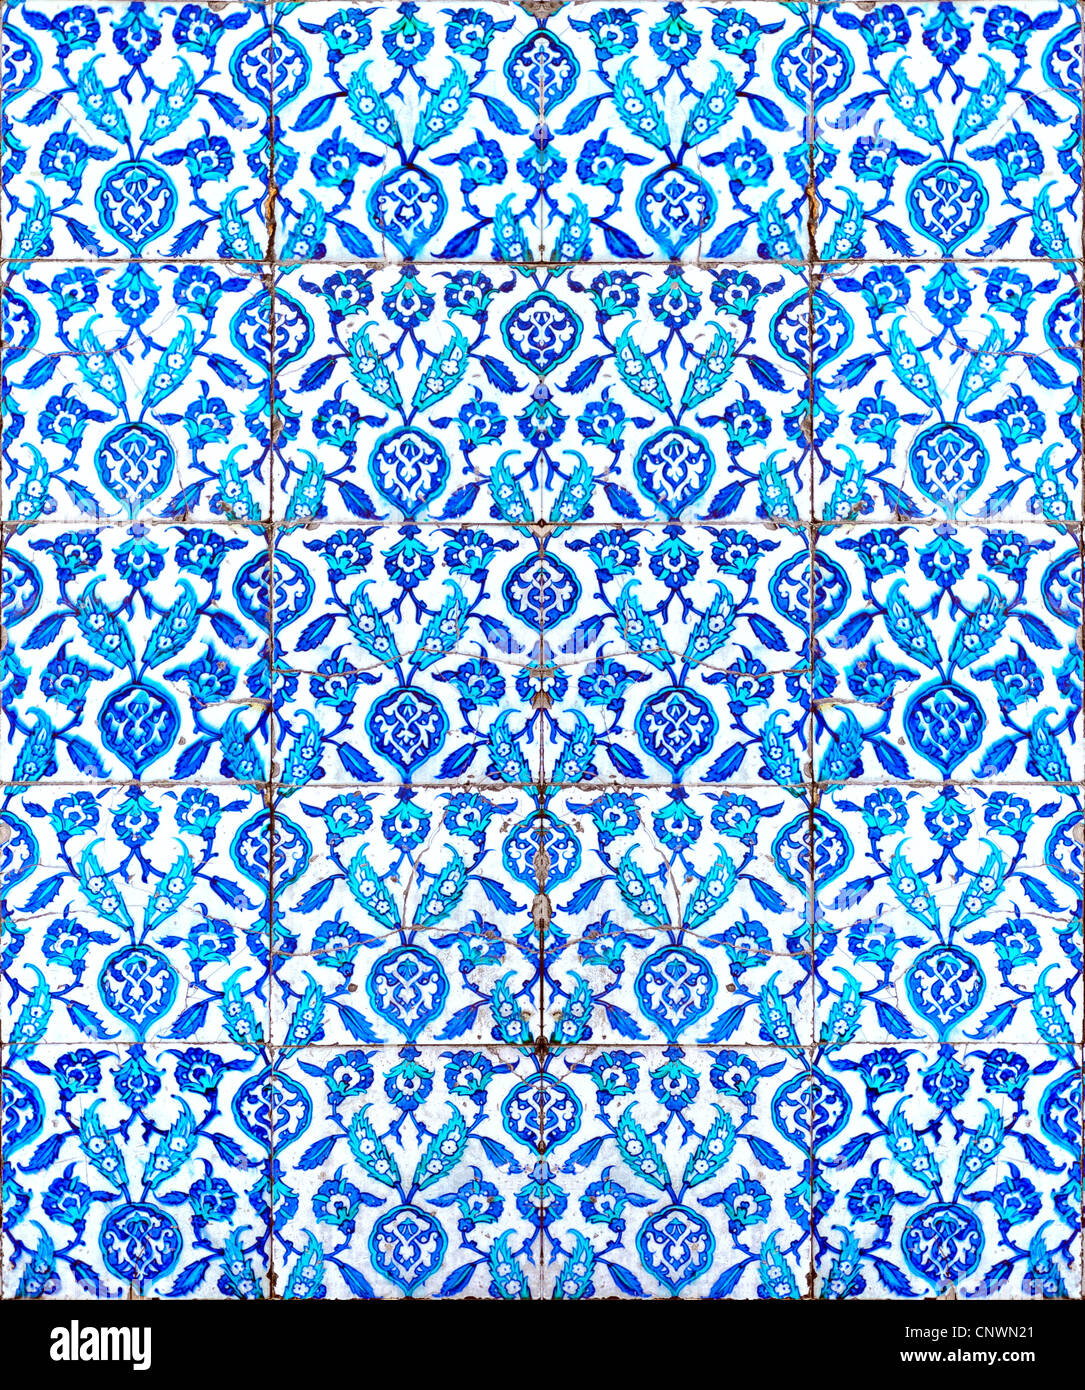 A seamless background image of ancient hand painted ceramic tiles from an islamic mosque. Stock Photo